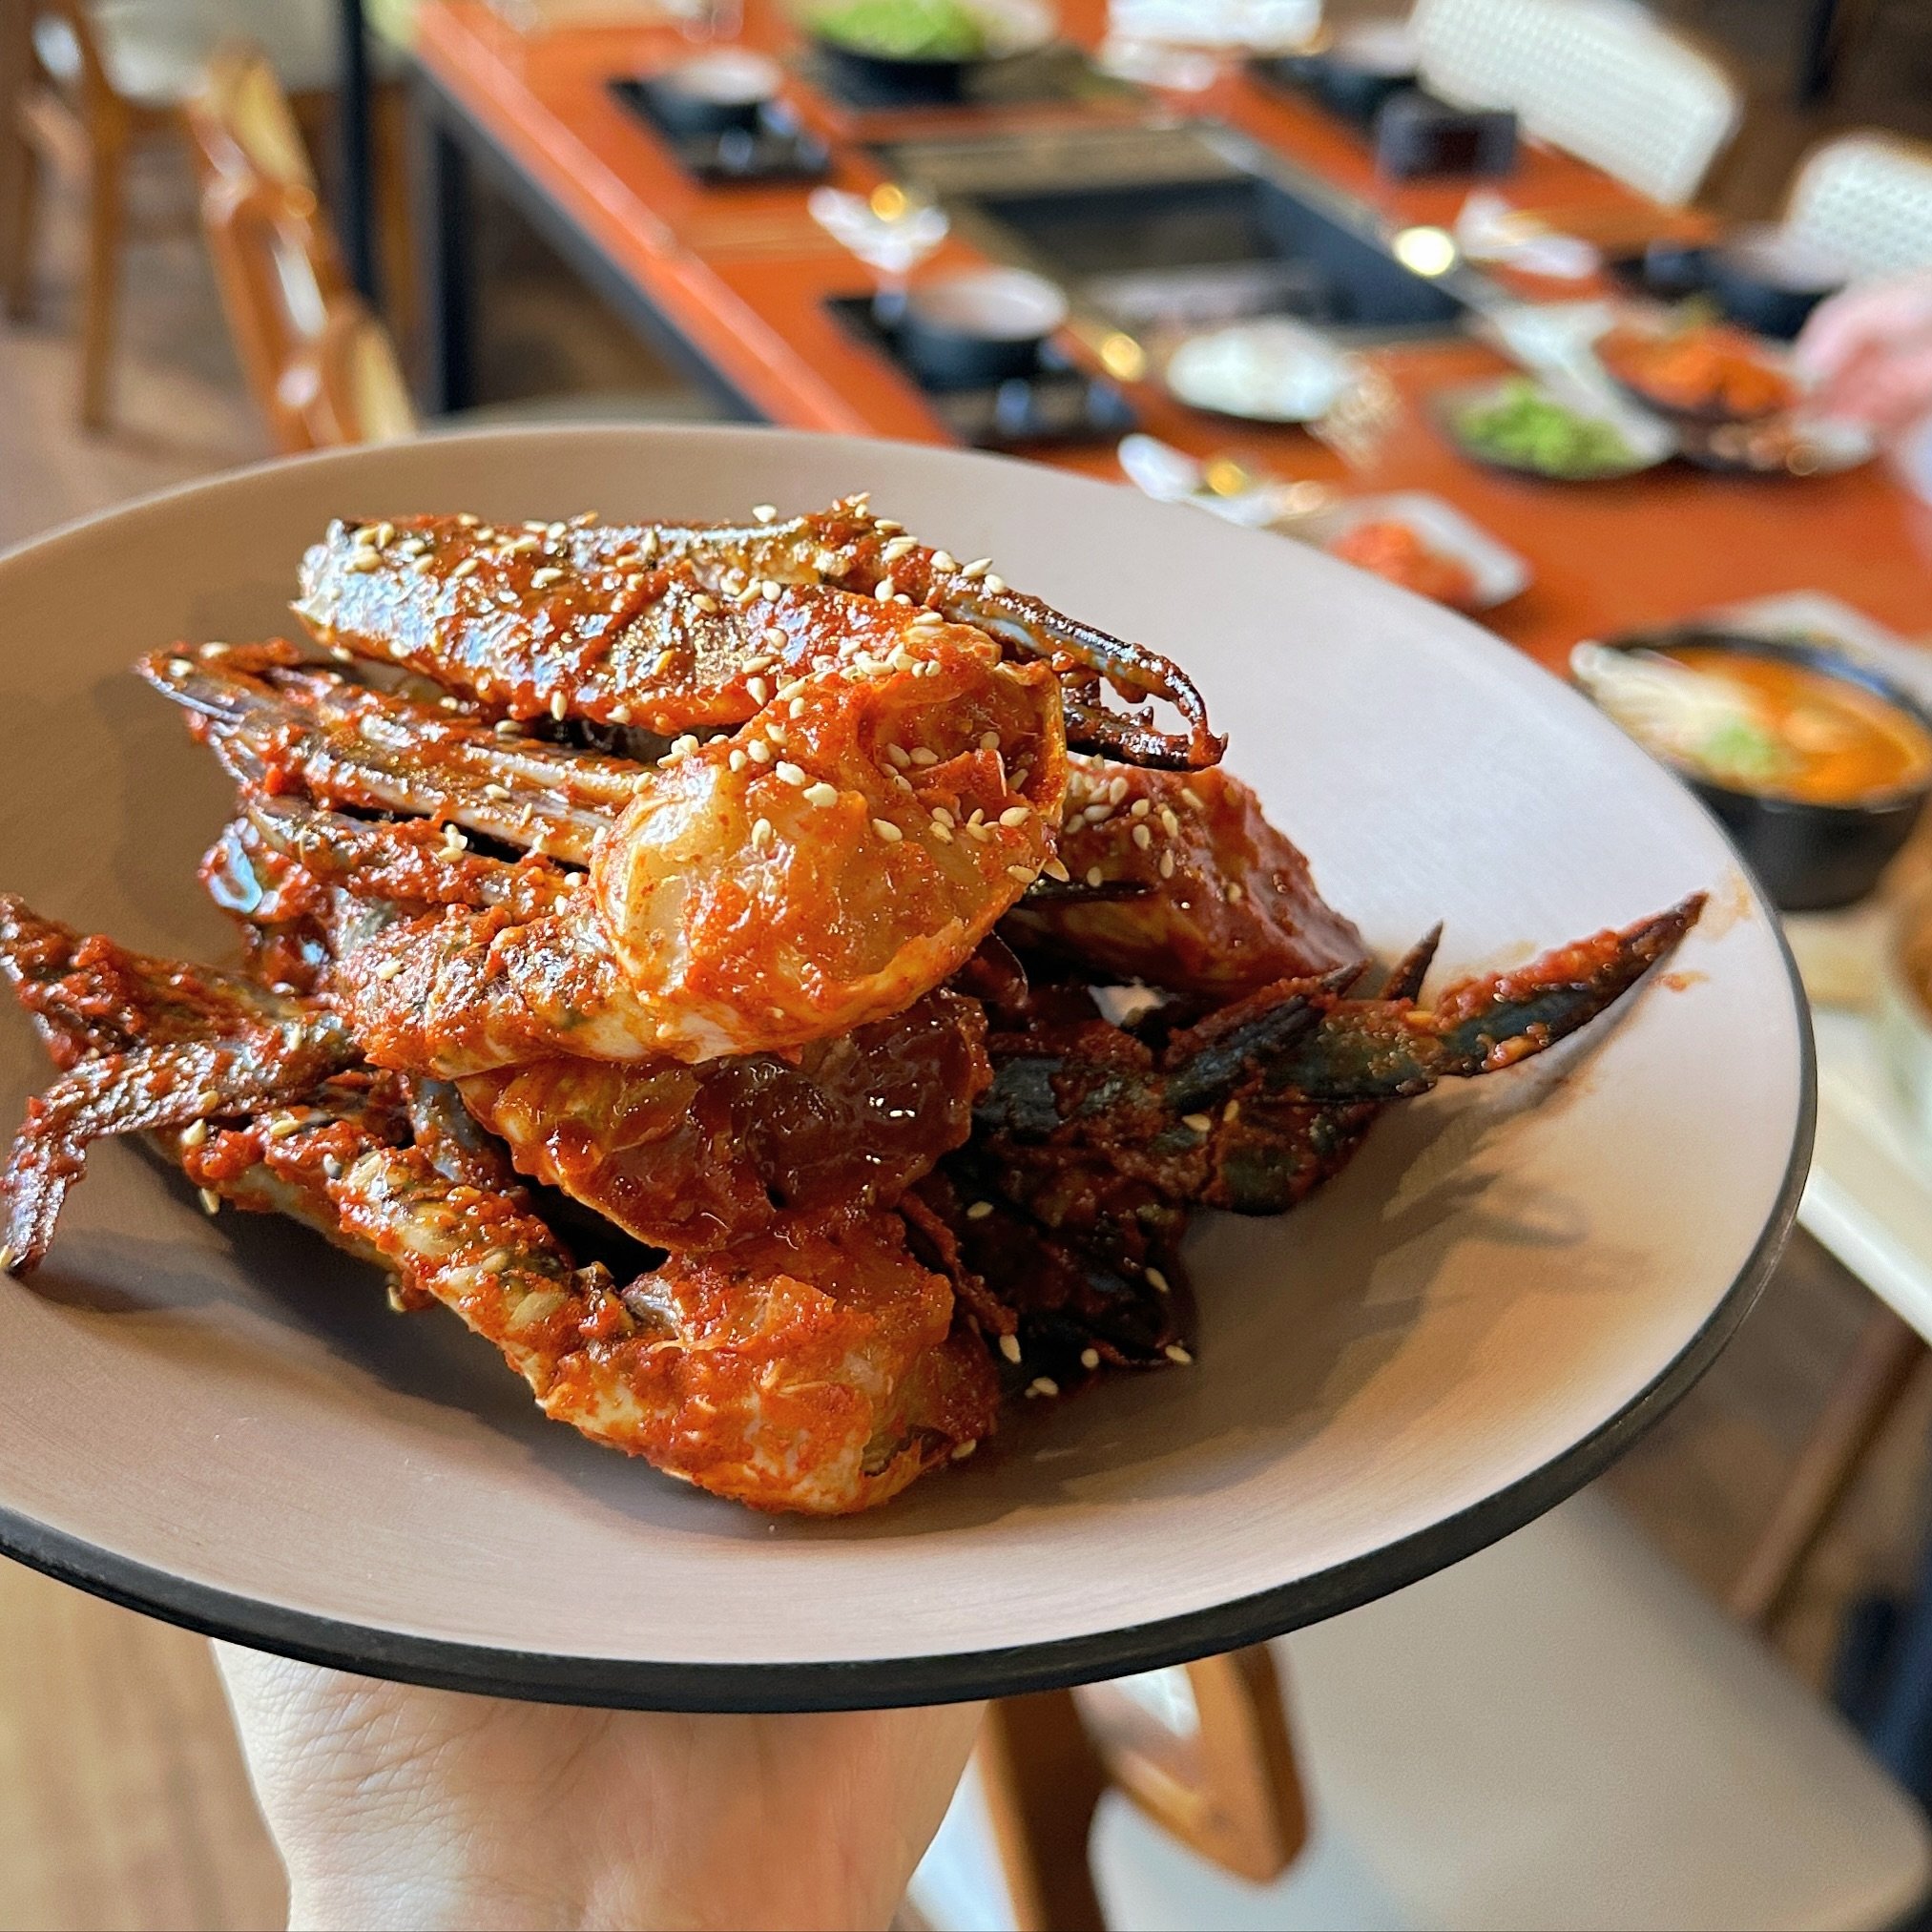 Get ready to indulge in our delicious Korean BBQ and enjoy a side of our famous Marinated Raw Crab! 🦀 Our spicy, sweet and savory marinated crab is a must-try, and it pairs perfectly with our tender, juicy meats. 🤗🦀👍

⏰ Mon-Fri 4:30pm-12:00am (la